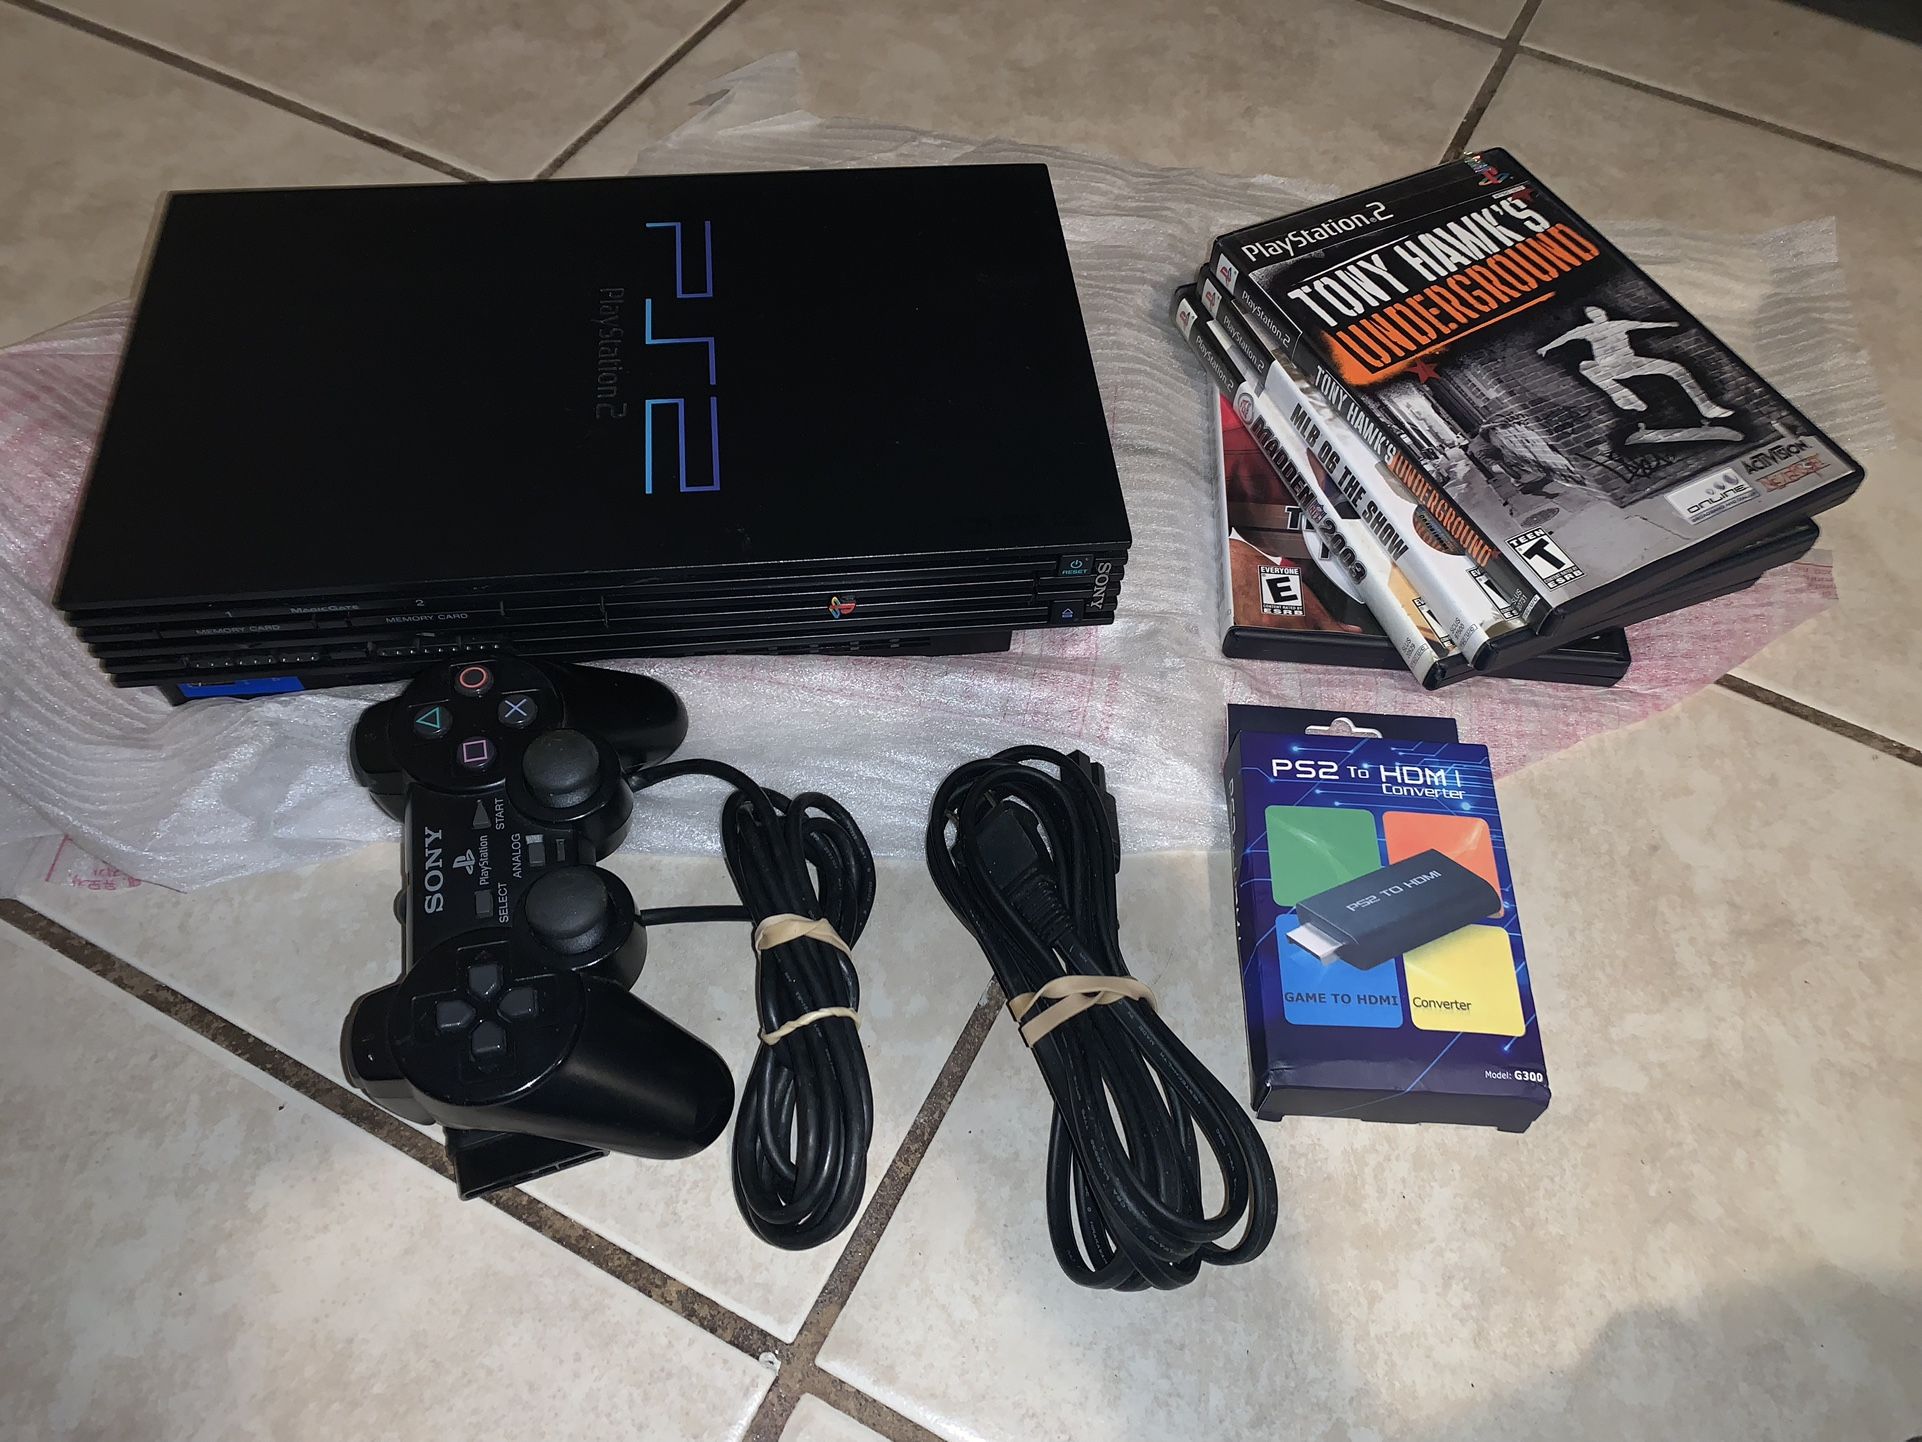 PLAYSTATION 2 SYSTEM WITH GAMES